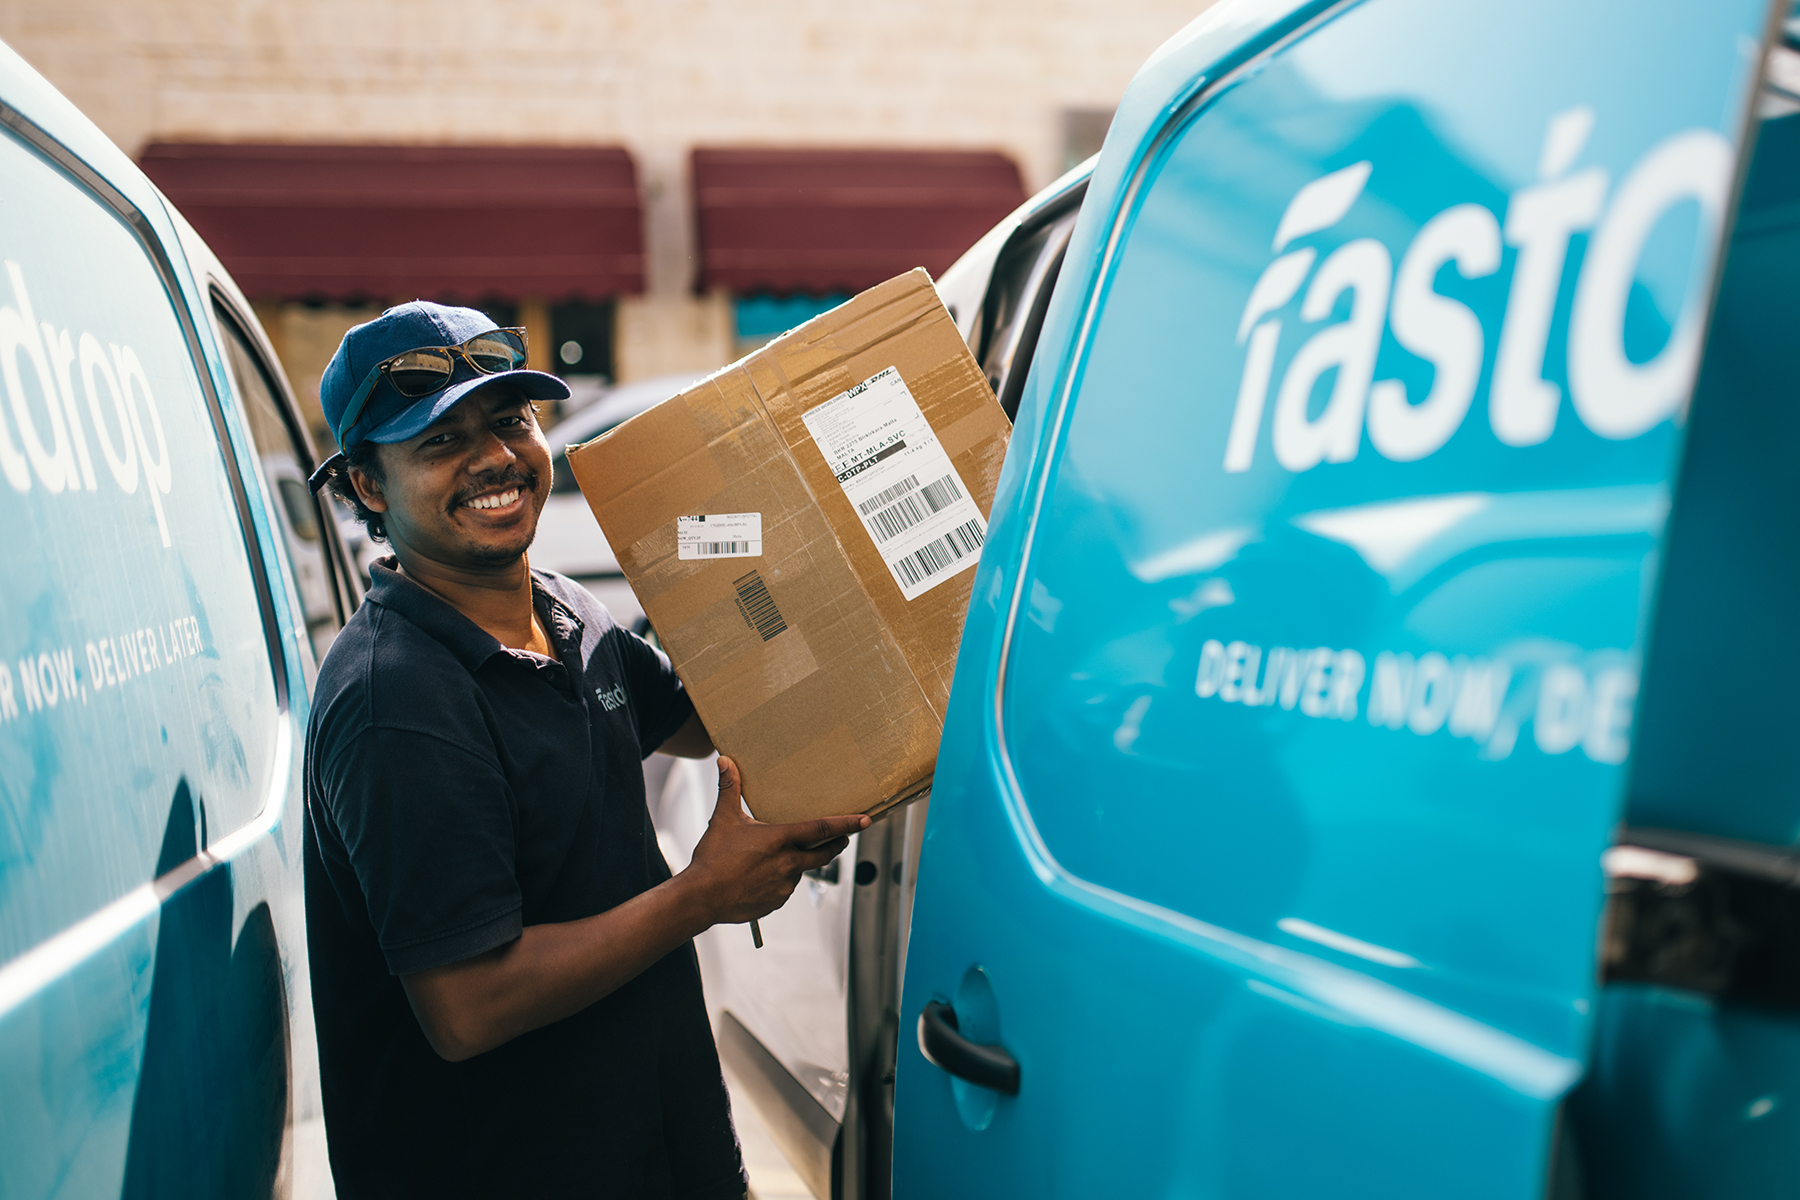 eCabs reinventing the last mile delivery industry through FastDrop.